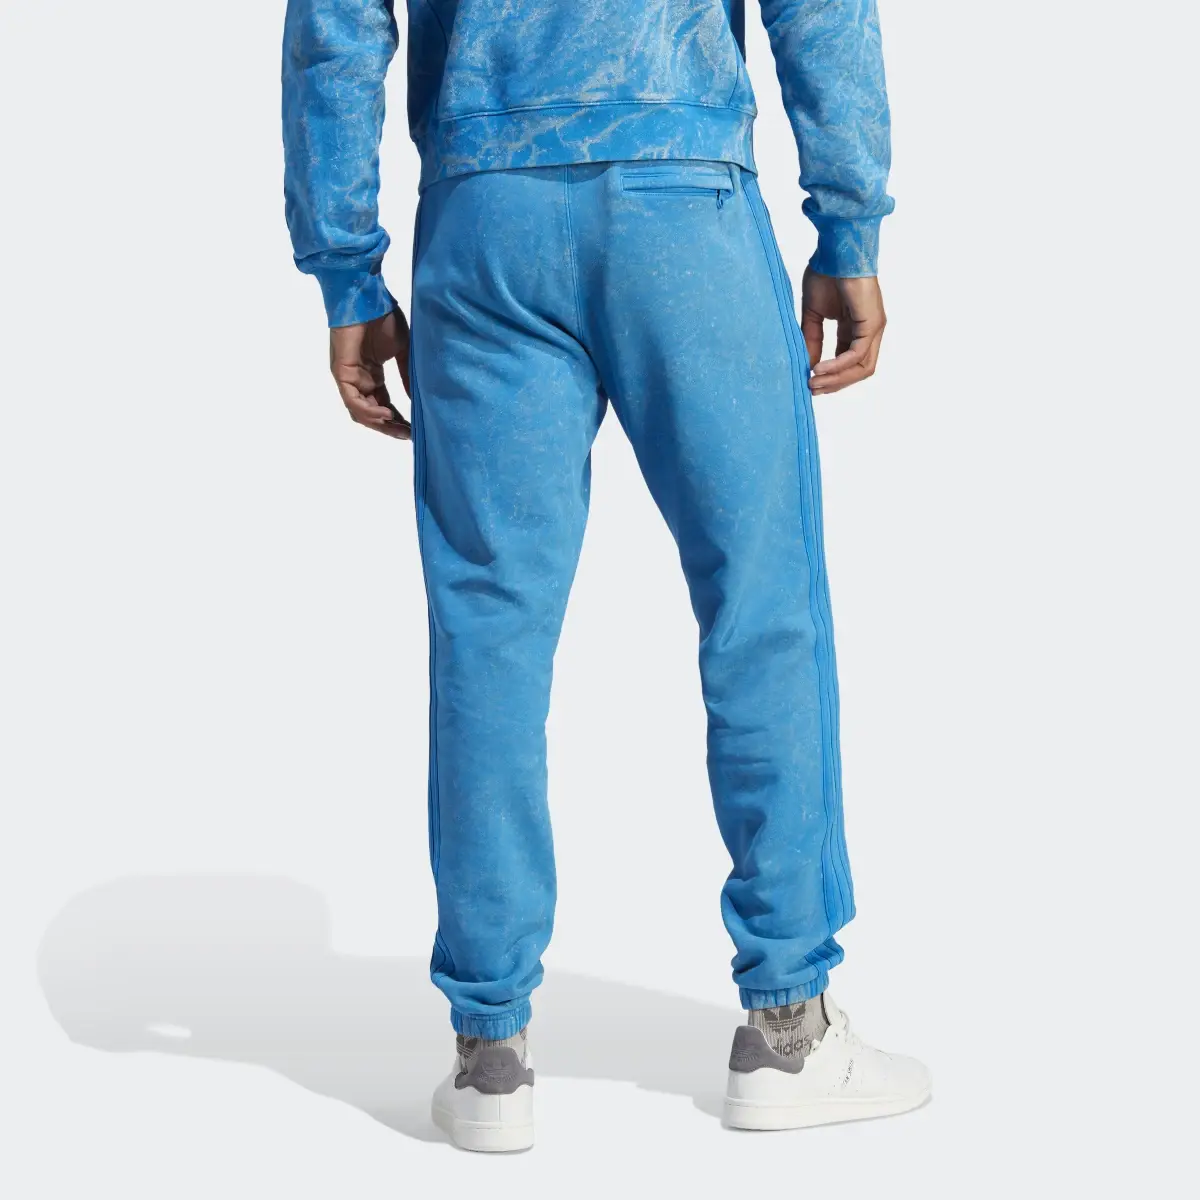 Adidas Blue Version Washed Joggers. 2